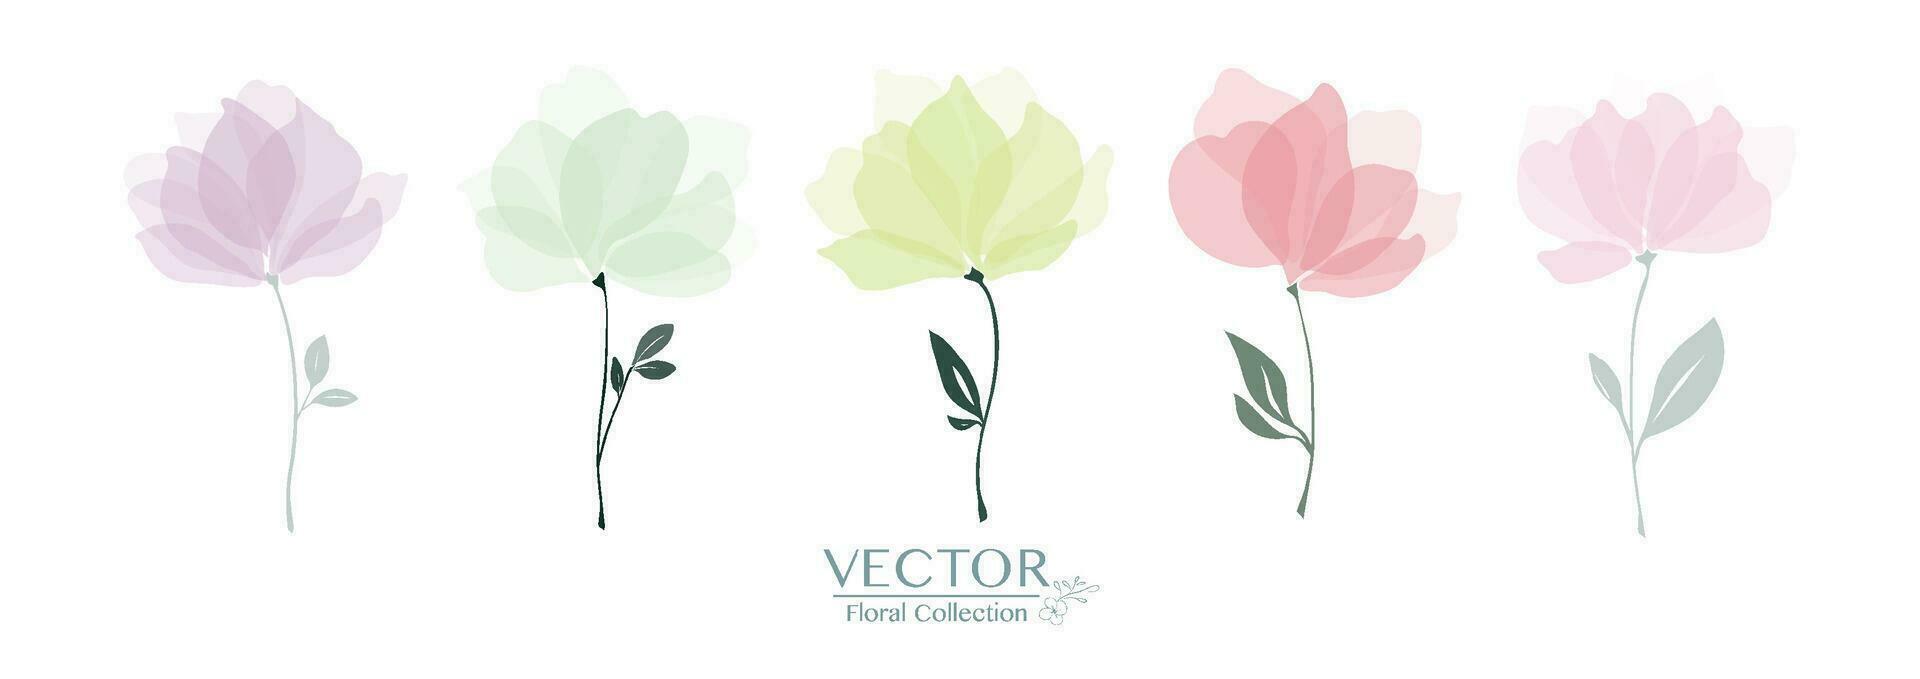 Set of cute floral collection vector